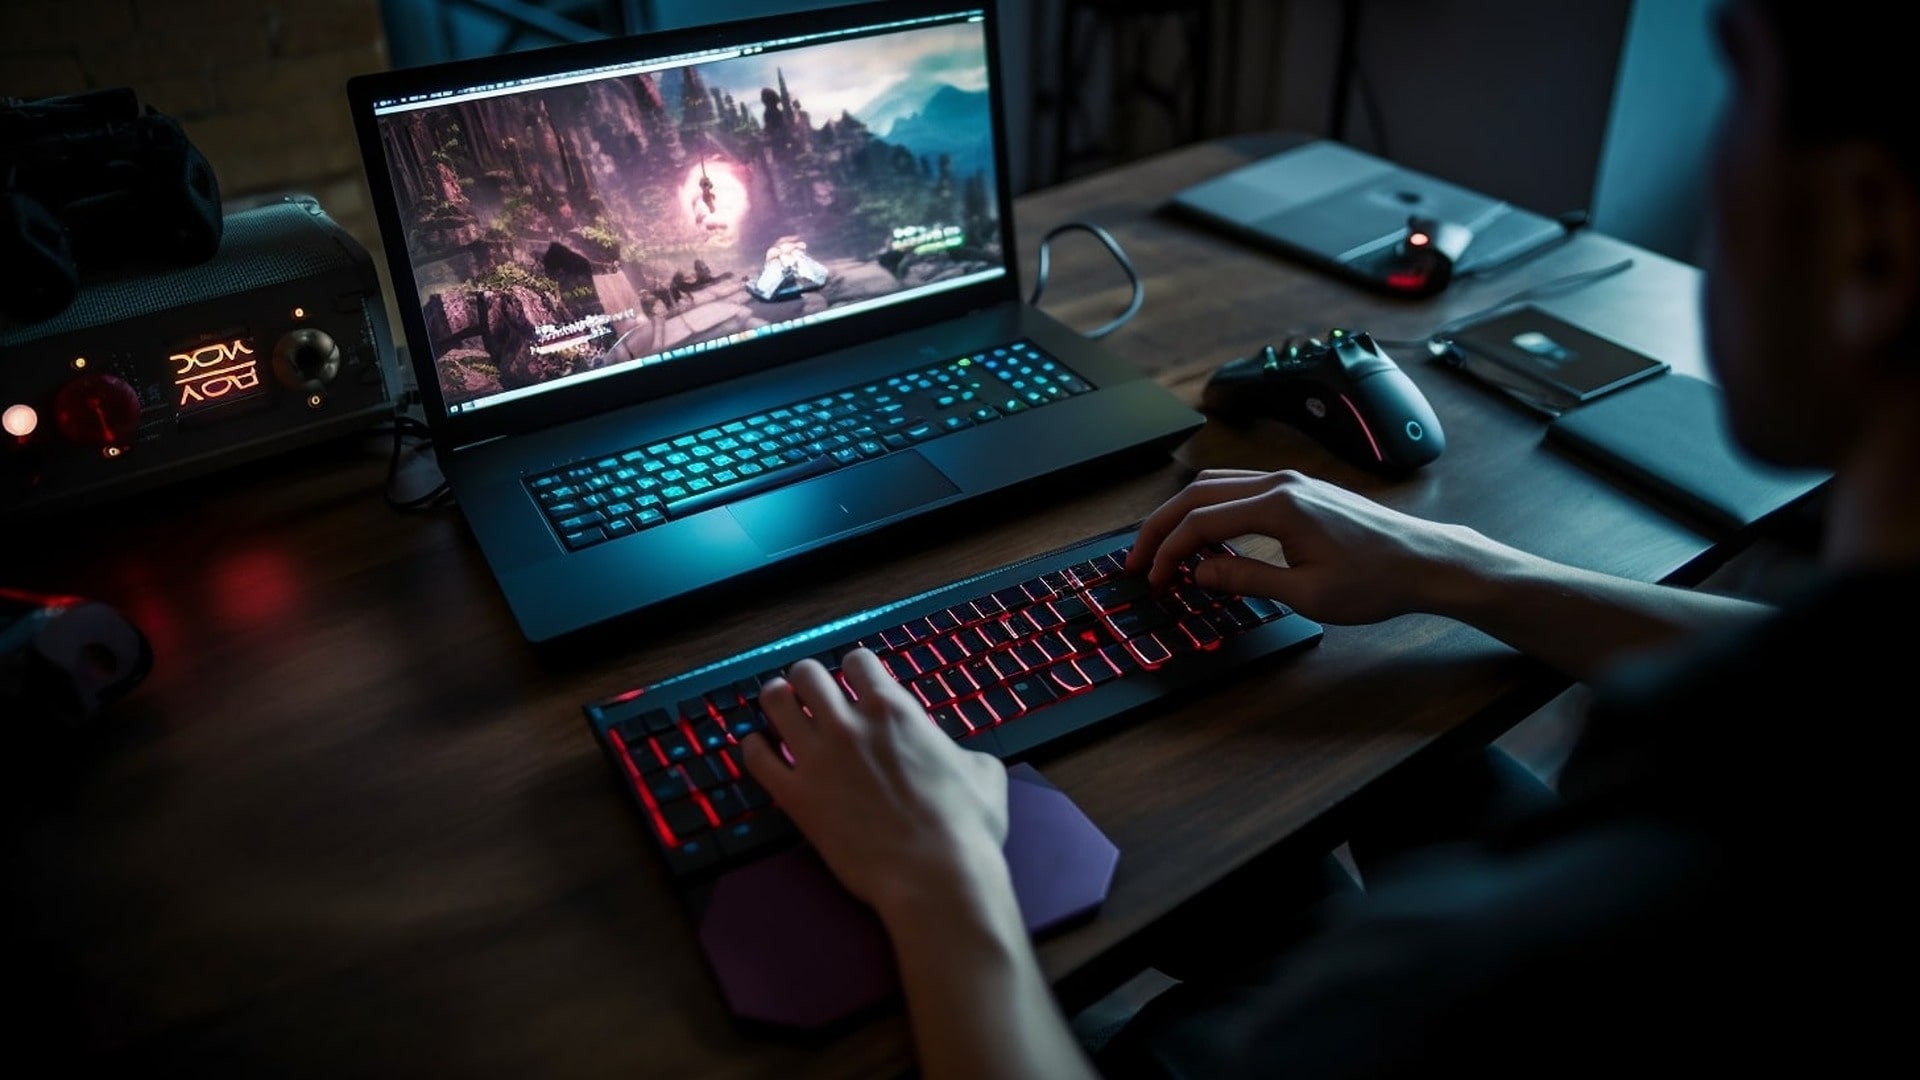 Gamer on a laptop engaged in cloud gaming, showcased with a setup guide and various gaming accessories.